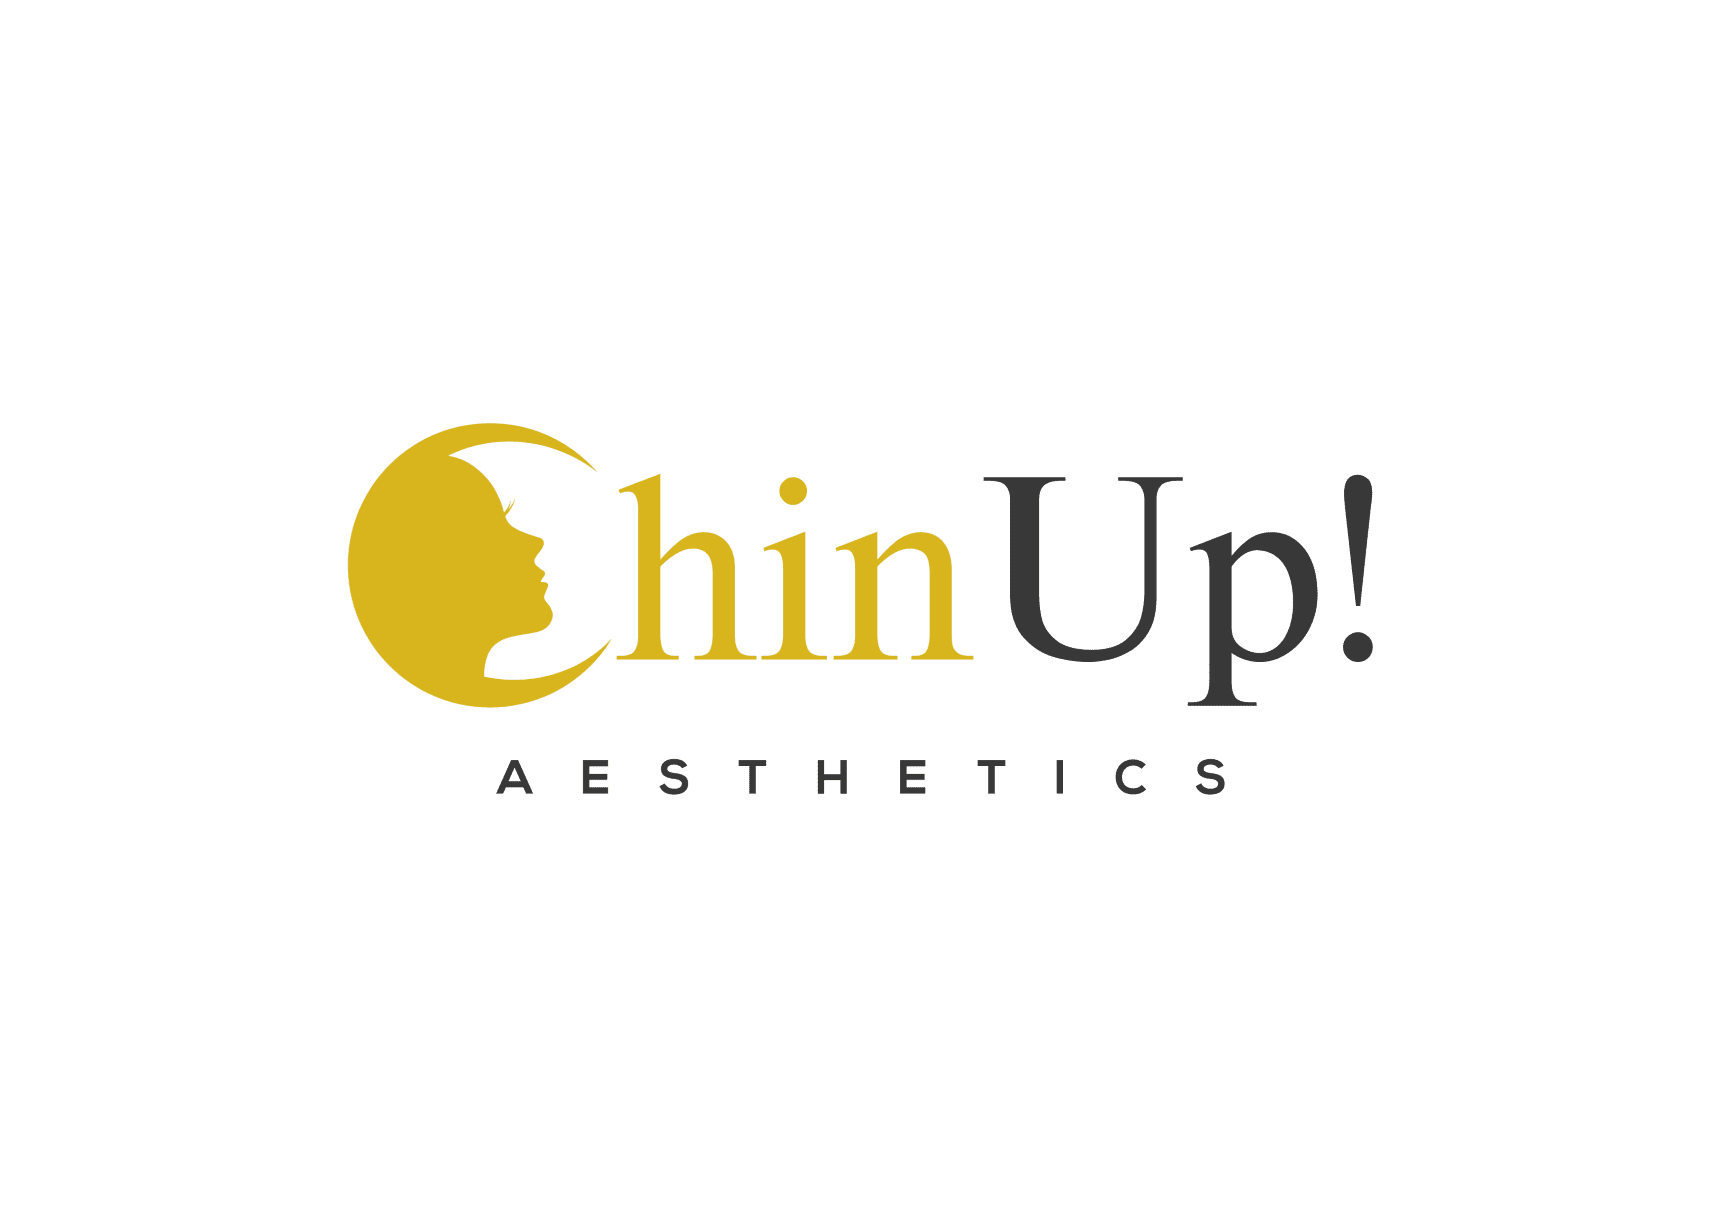 chin up logo2 emails